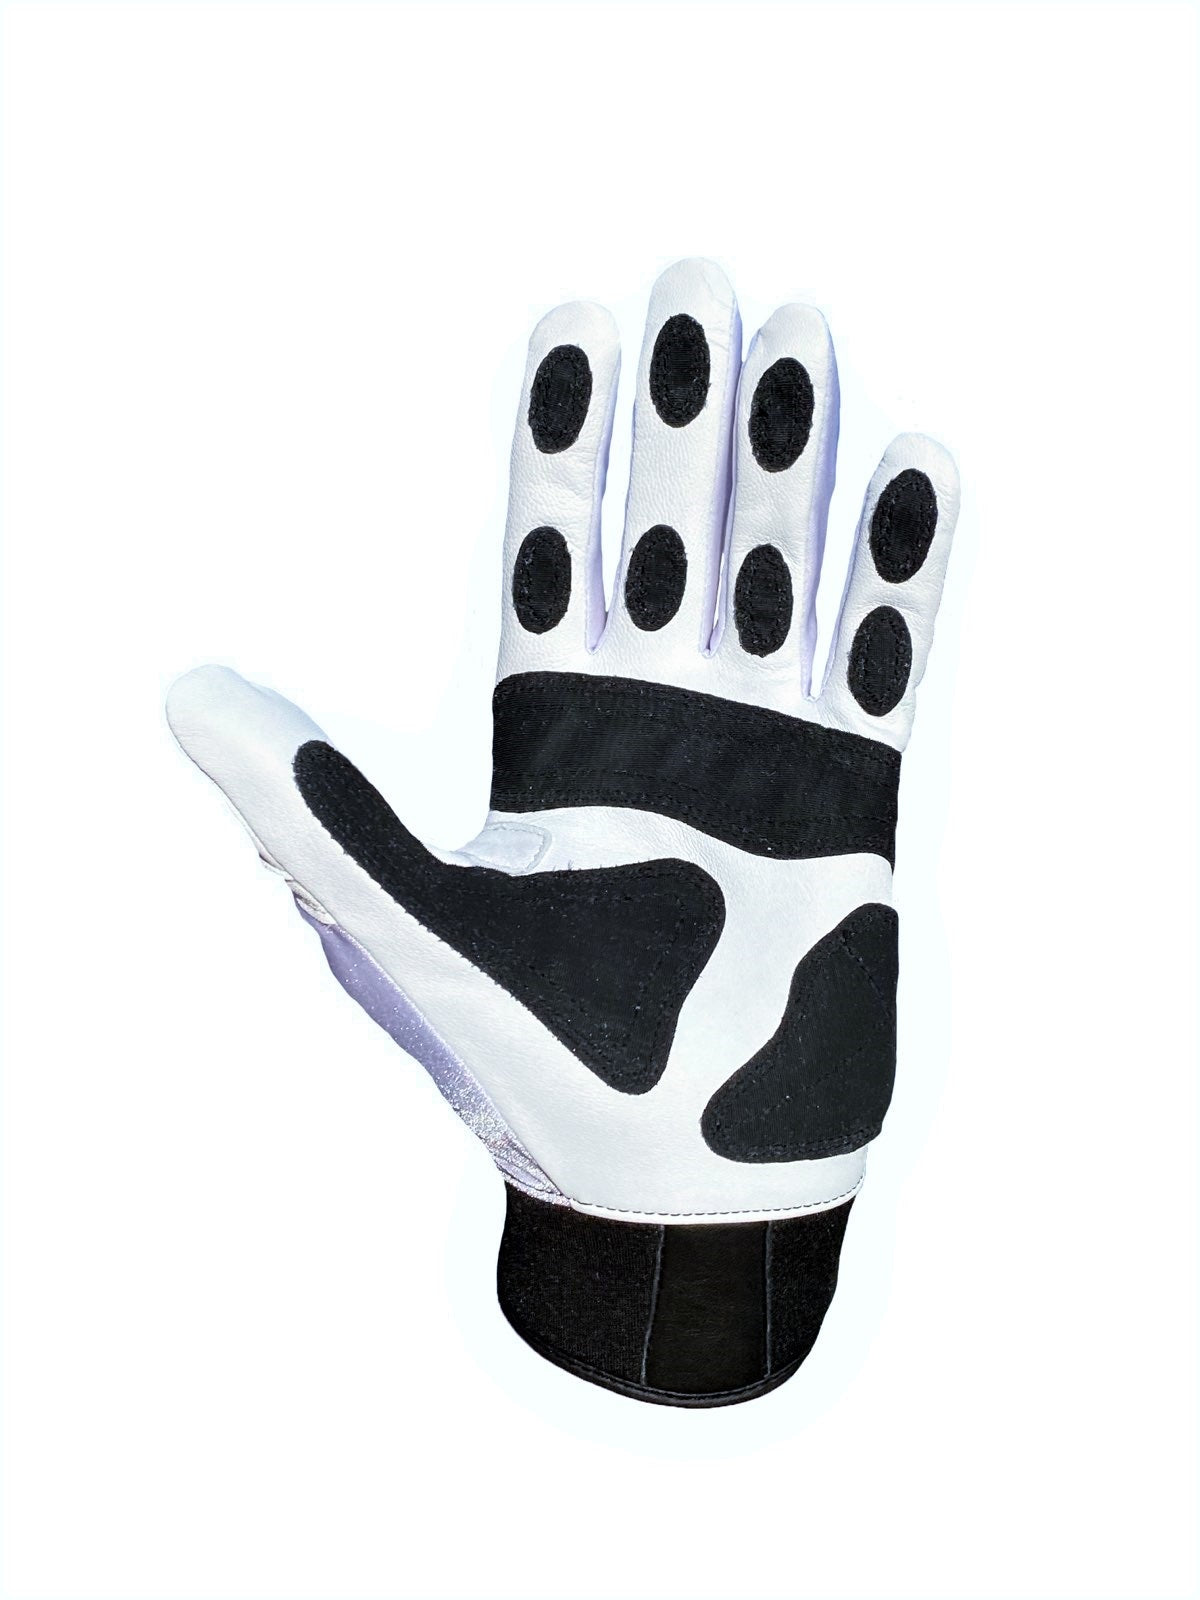 VukGripz Alpha 2.0 Red Batting Gloves featuring white palm and black grip material